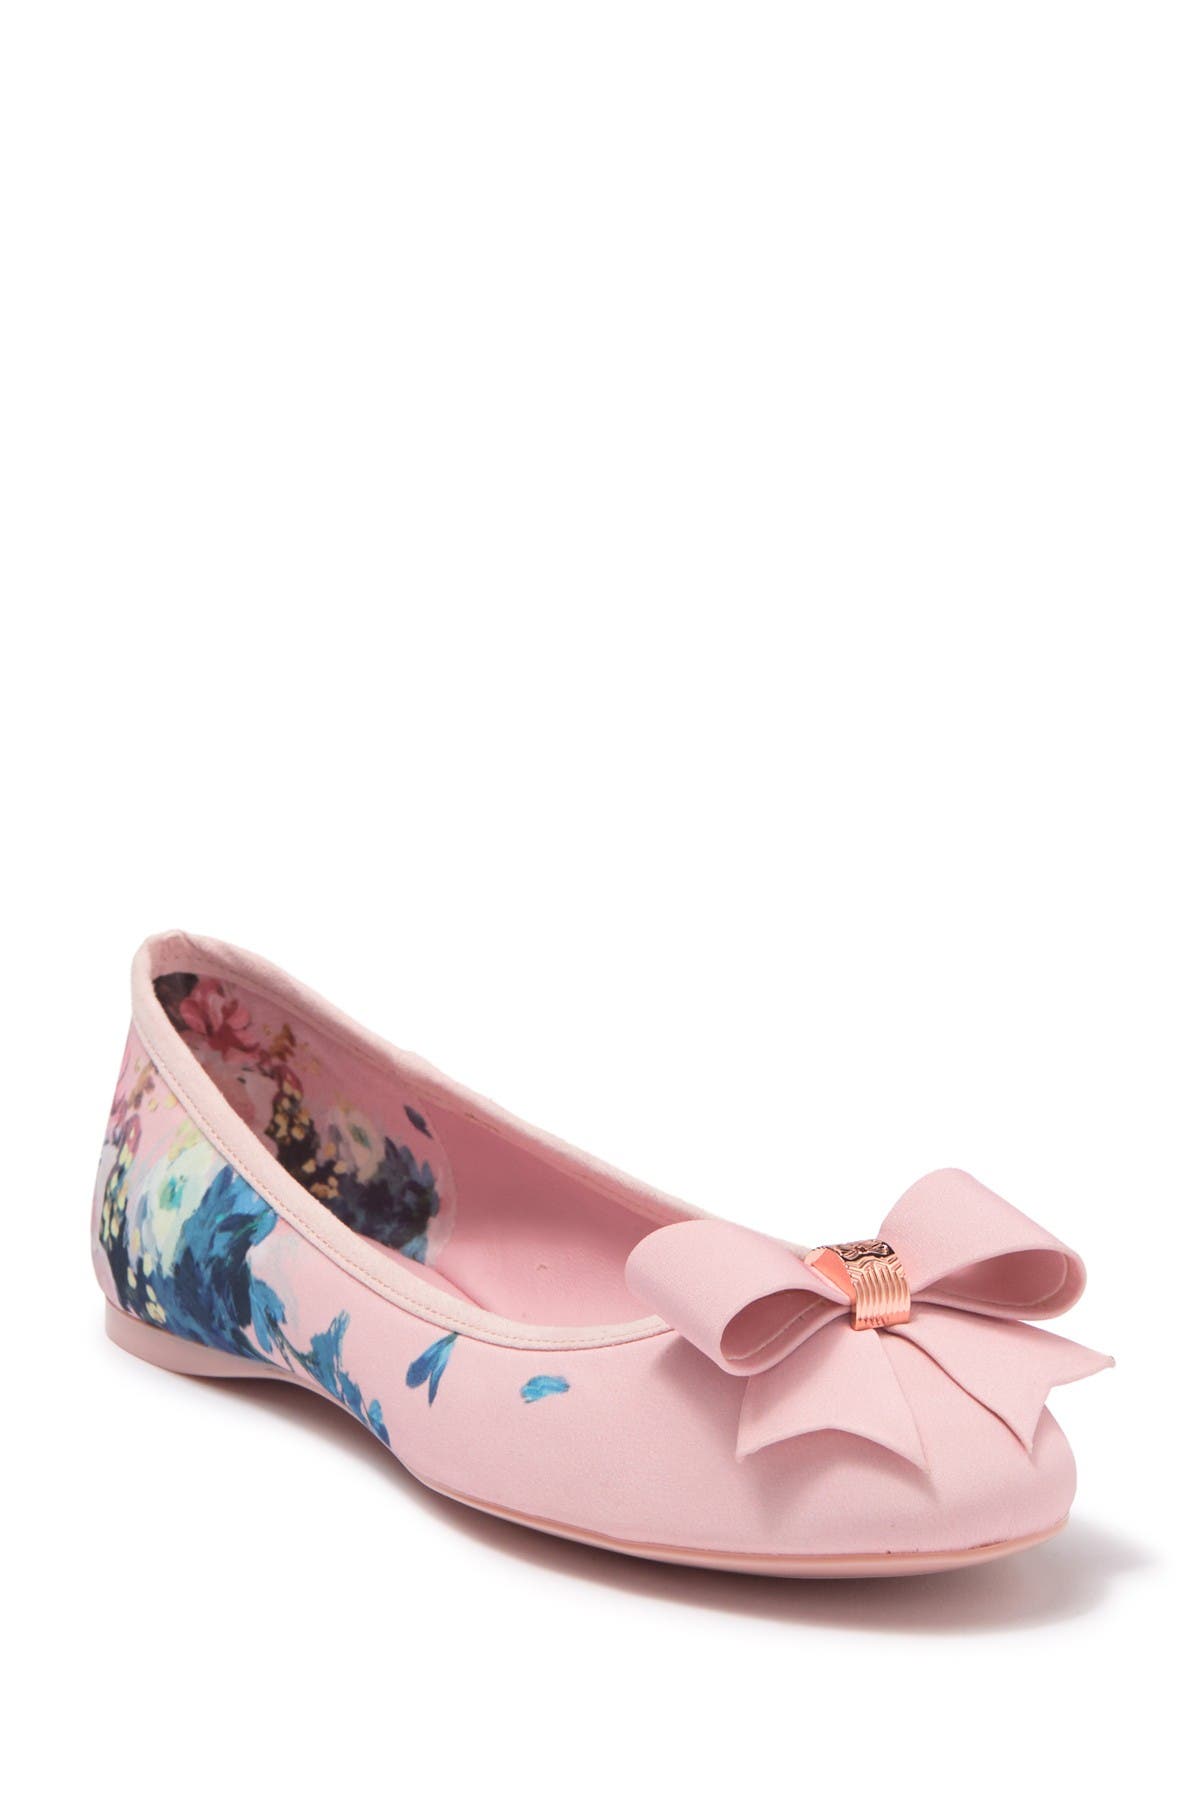 baby blue ted baker shoes